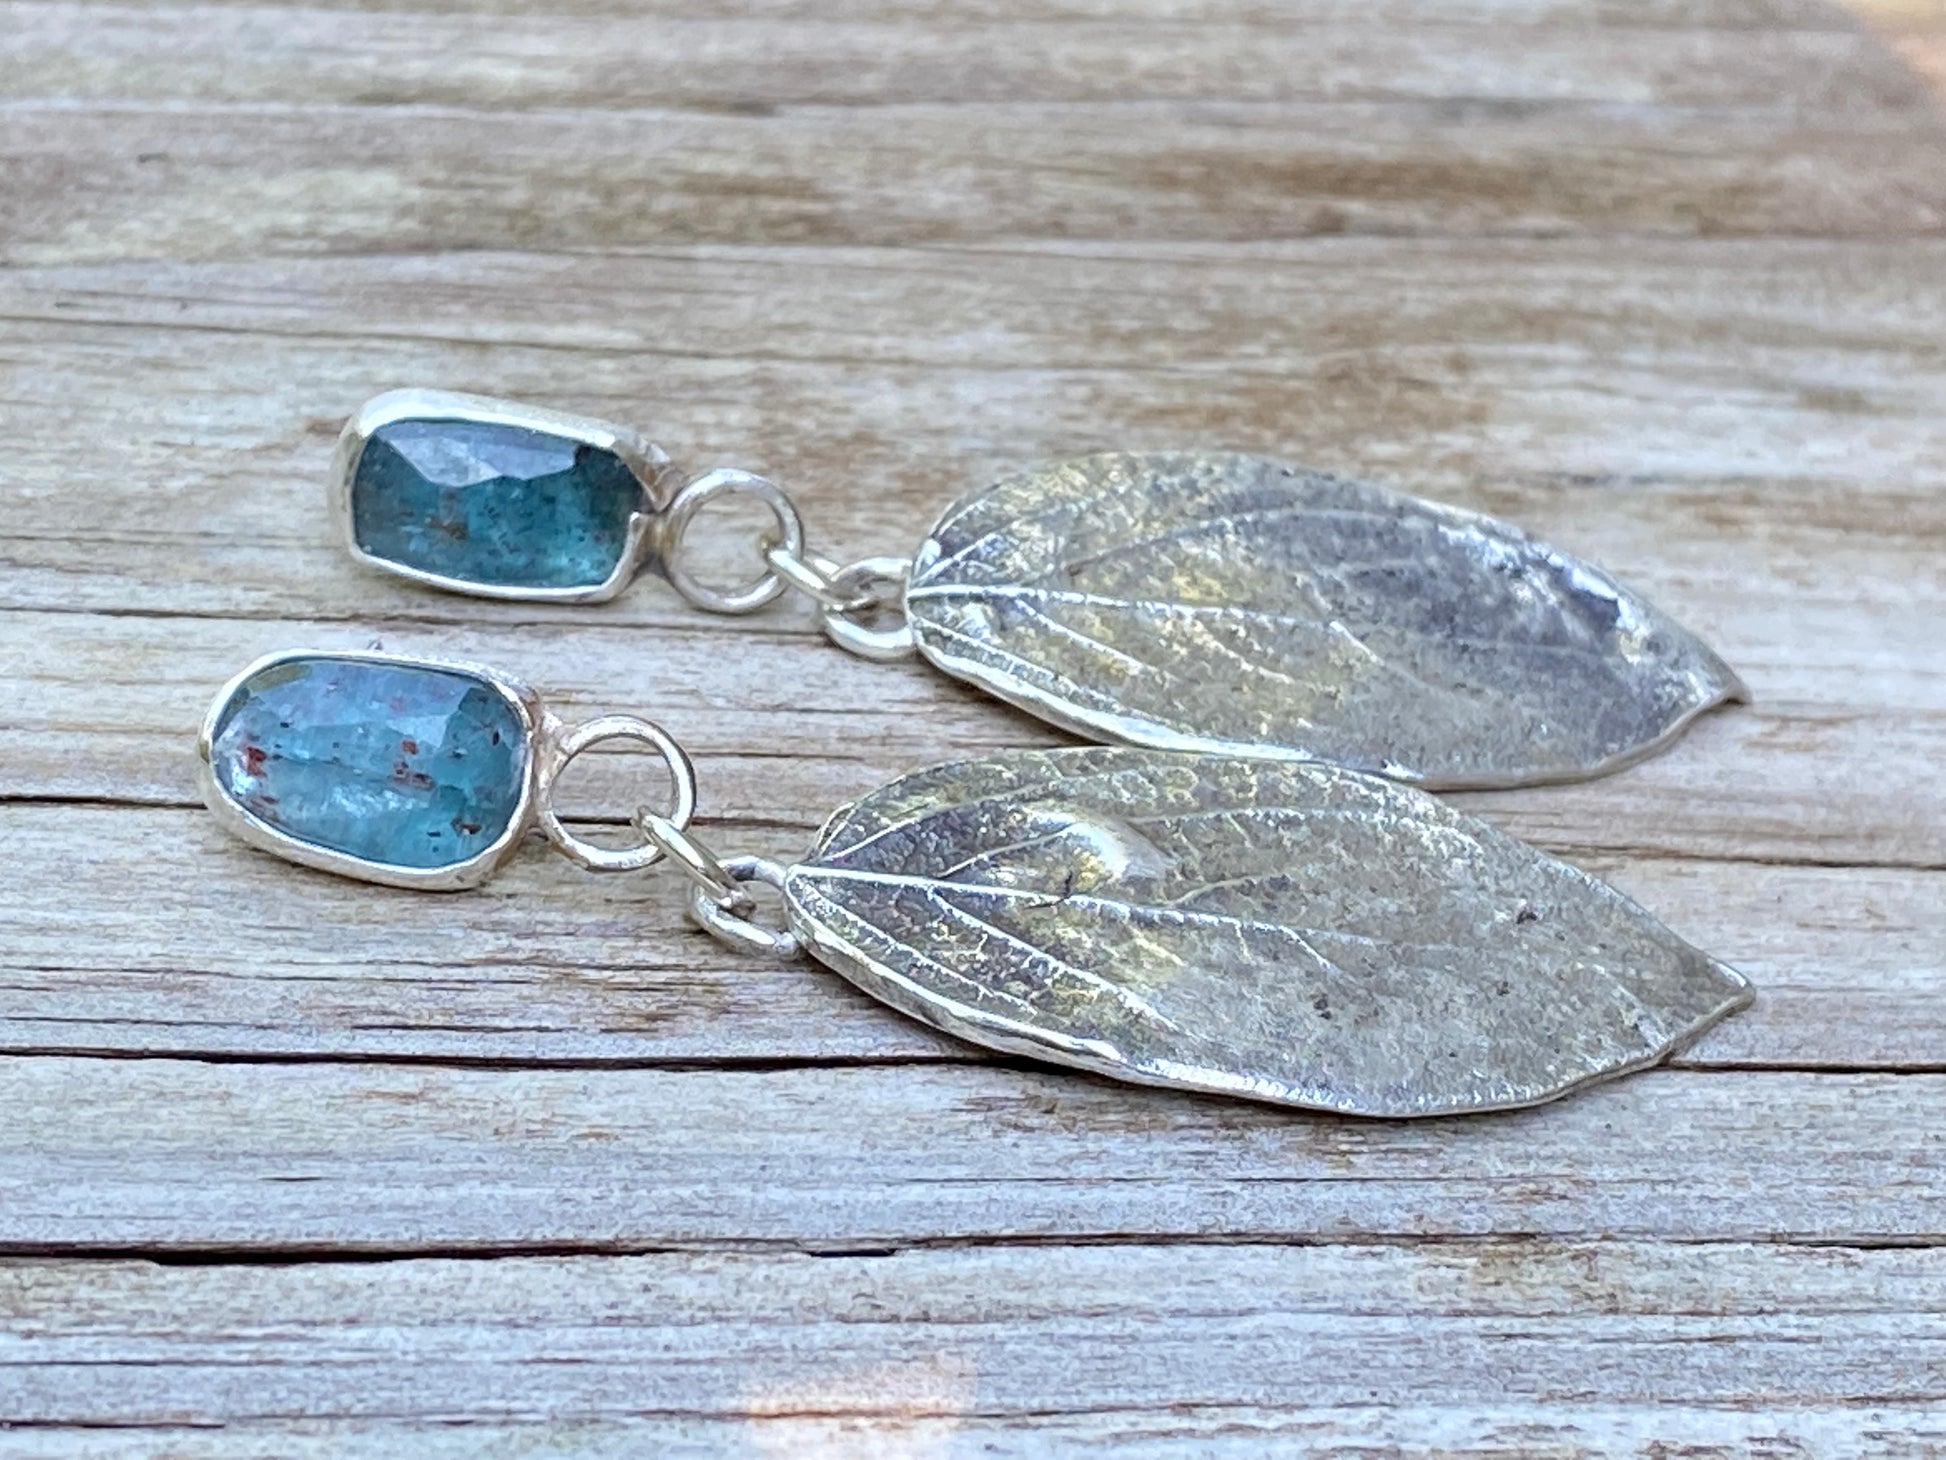 Teal Moss Kyanite gemstone & Silver leaf earrings - collectionsbytracy.com